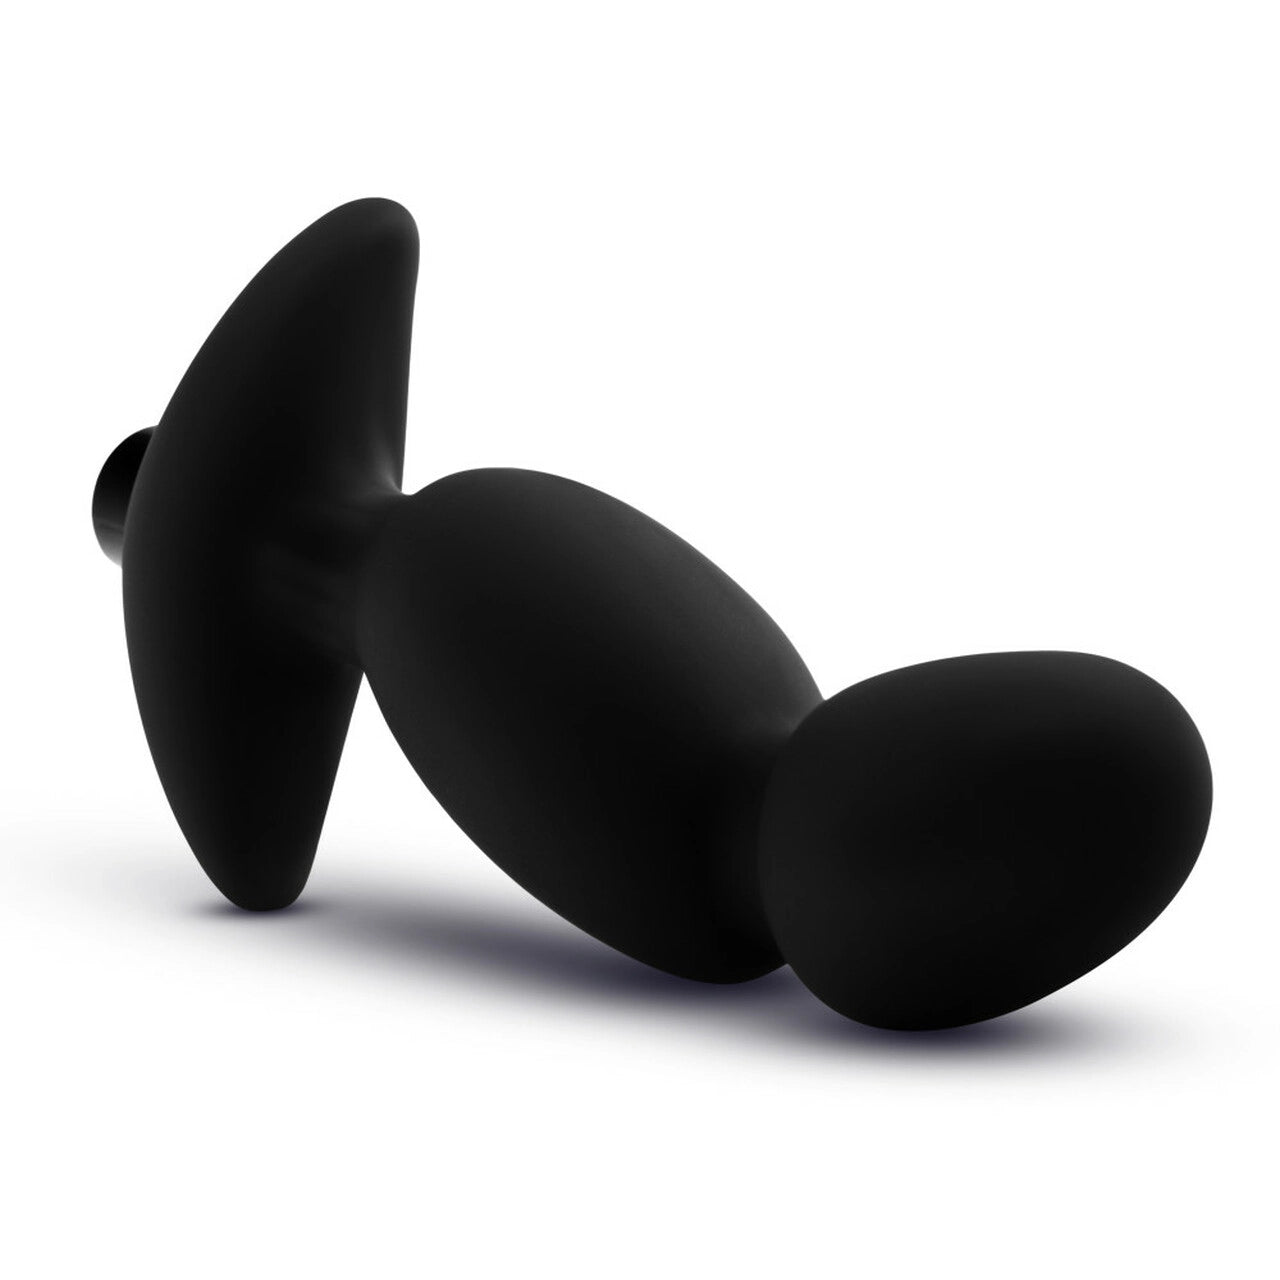 Anal Adventures Platinum Silicone Vibrating Prostate Massager 04 - Melody's Room